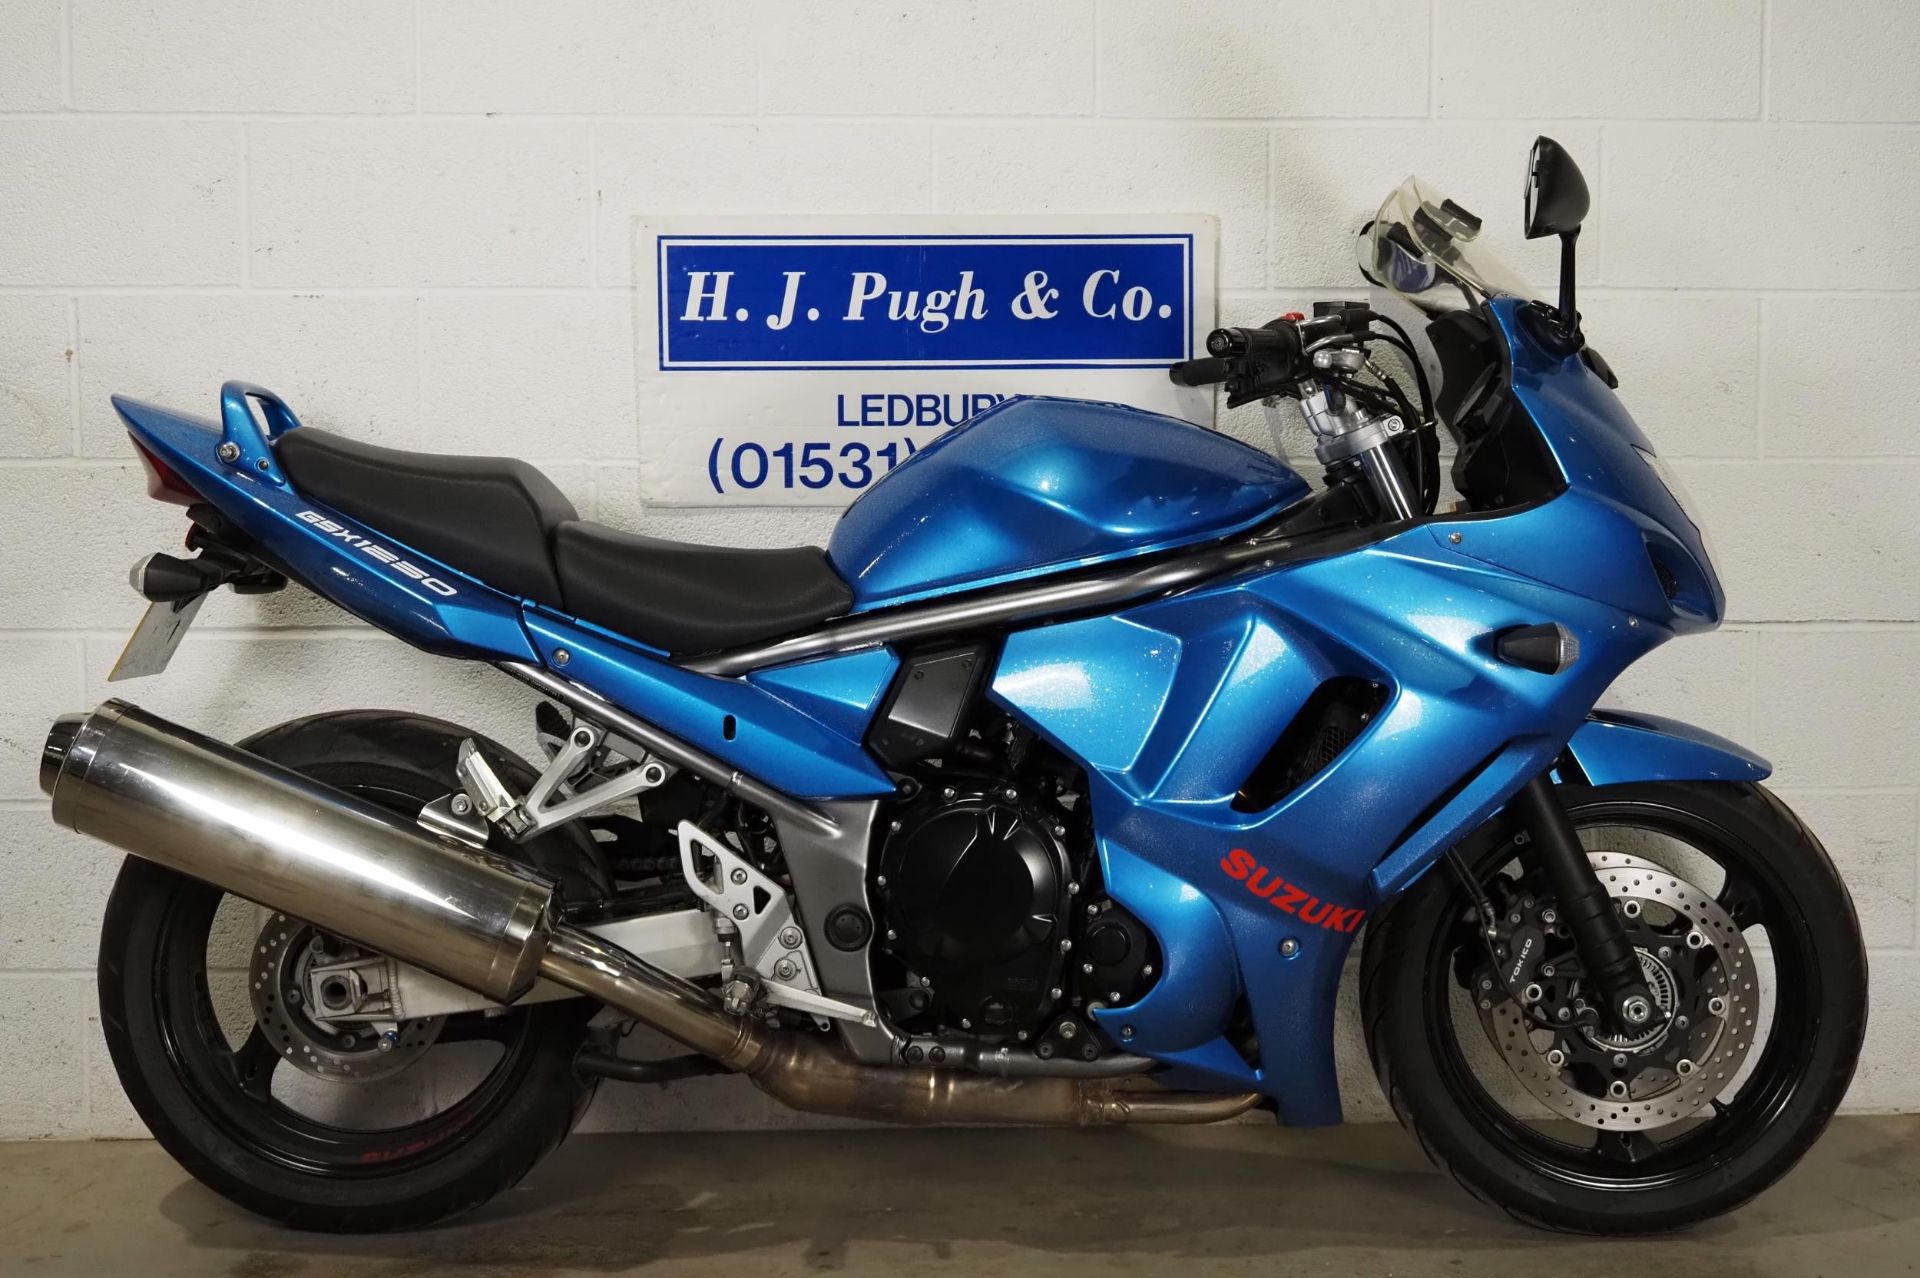 Suzuki GSX 1250, 2013. Purchased from Honda main dealer in 2023 by senior rider, only used